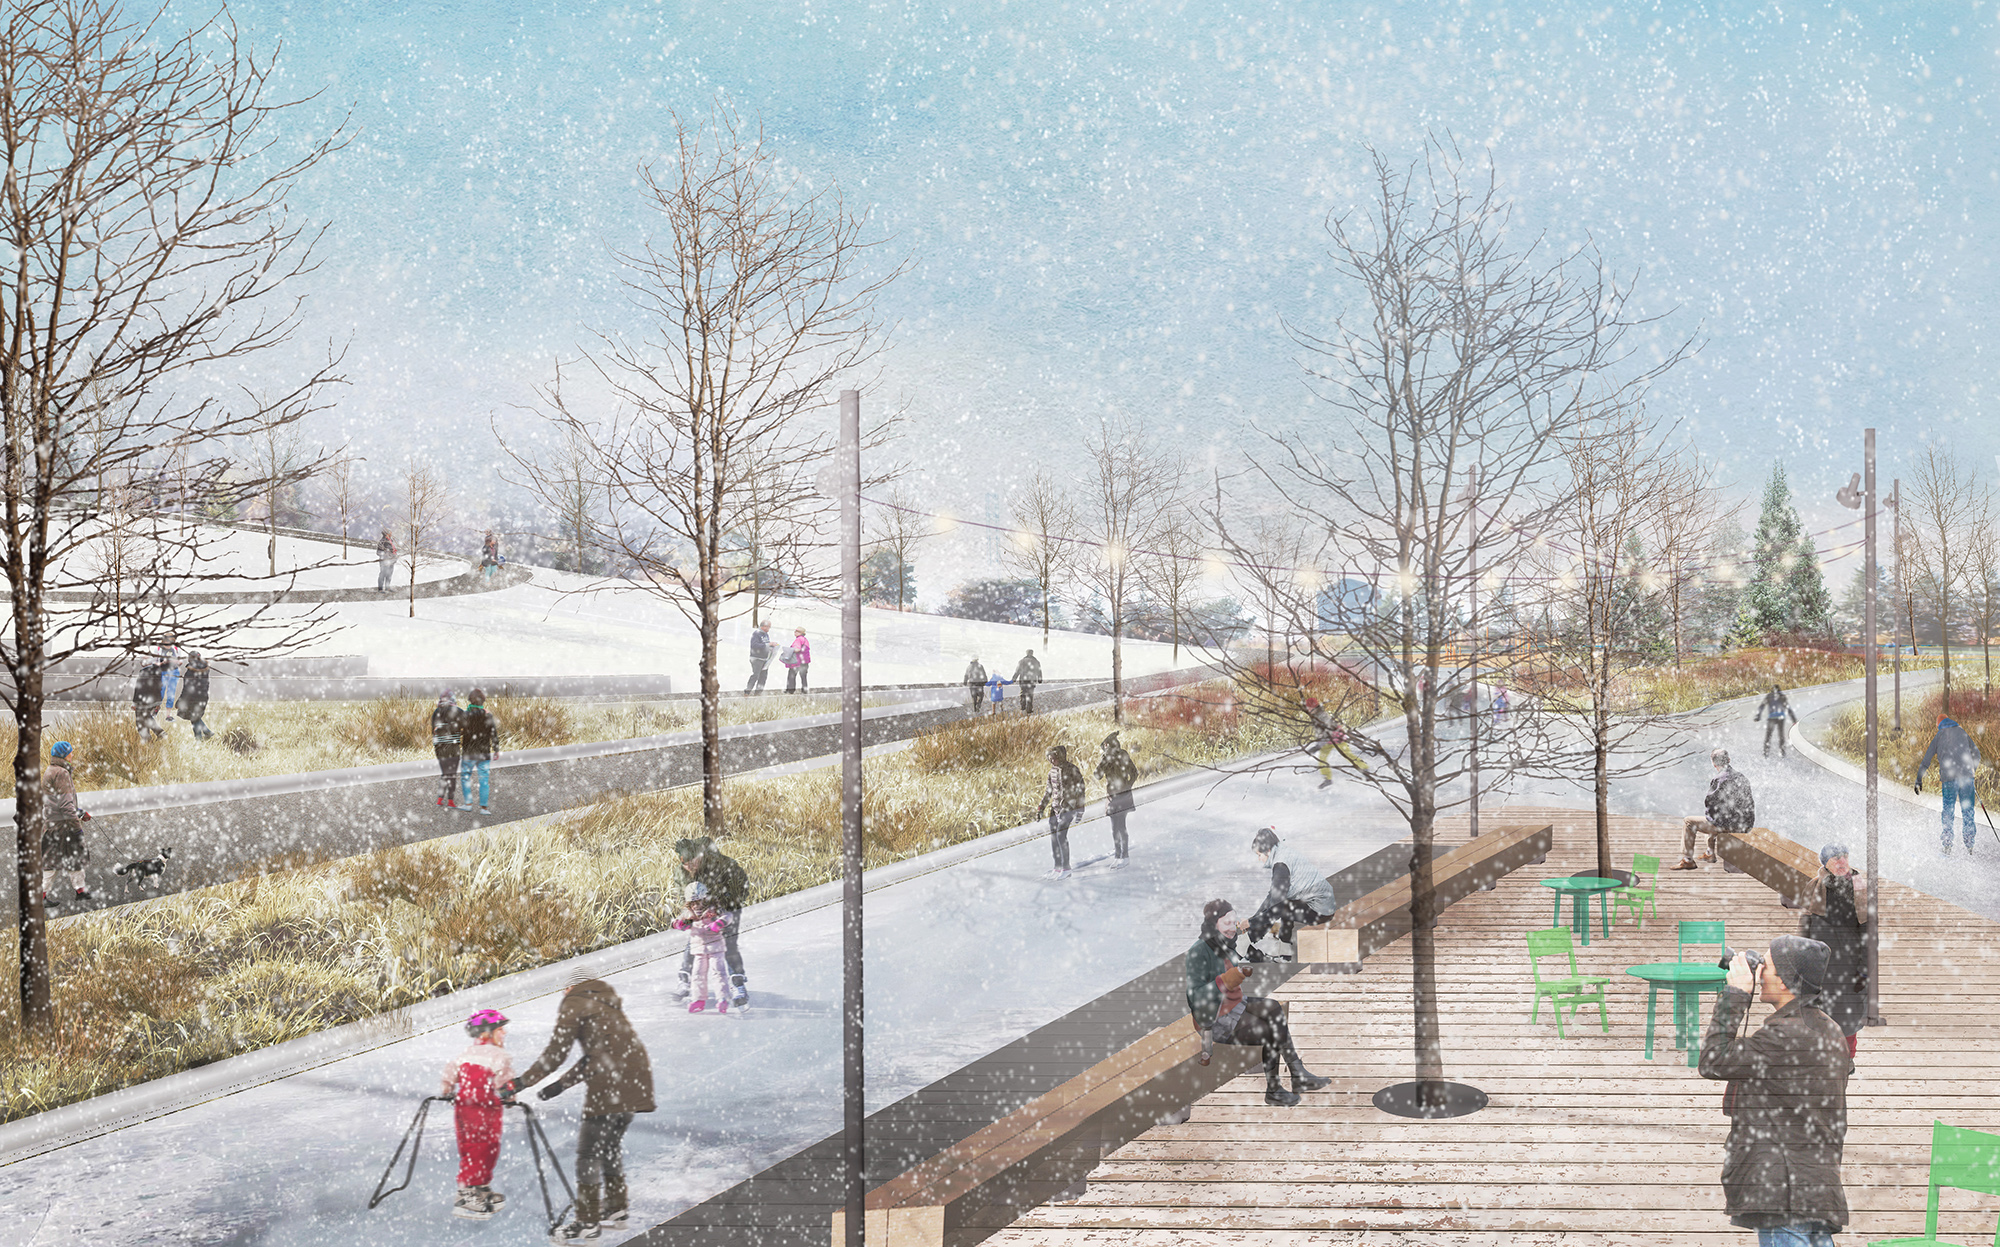 This view demonstrates what the skate trail plaza at the bottom of the hill could look like. Included in the view are the accessible path up the hill, amphitheatre and seating deck in the middle of the figure eight skate trail. Between the hill and the skate trail is the asphalt fitness loop.